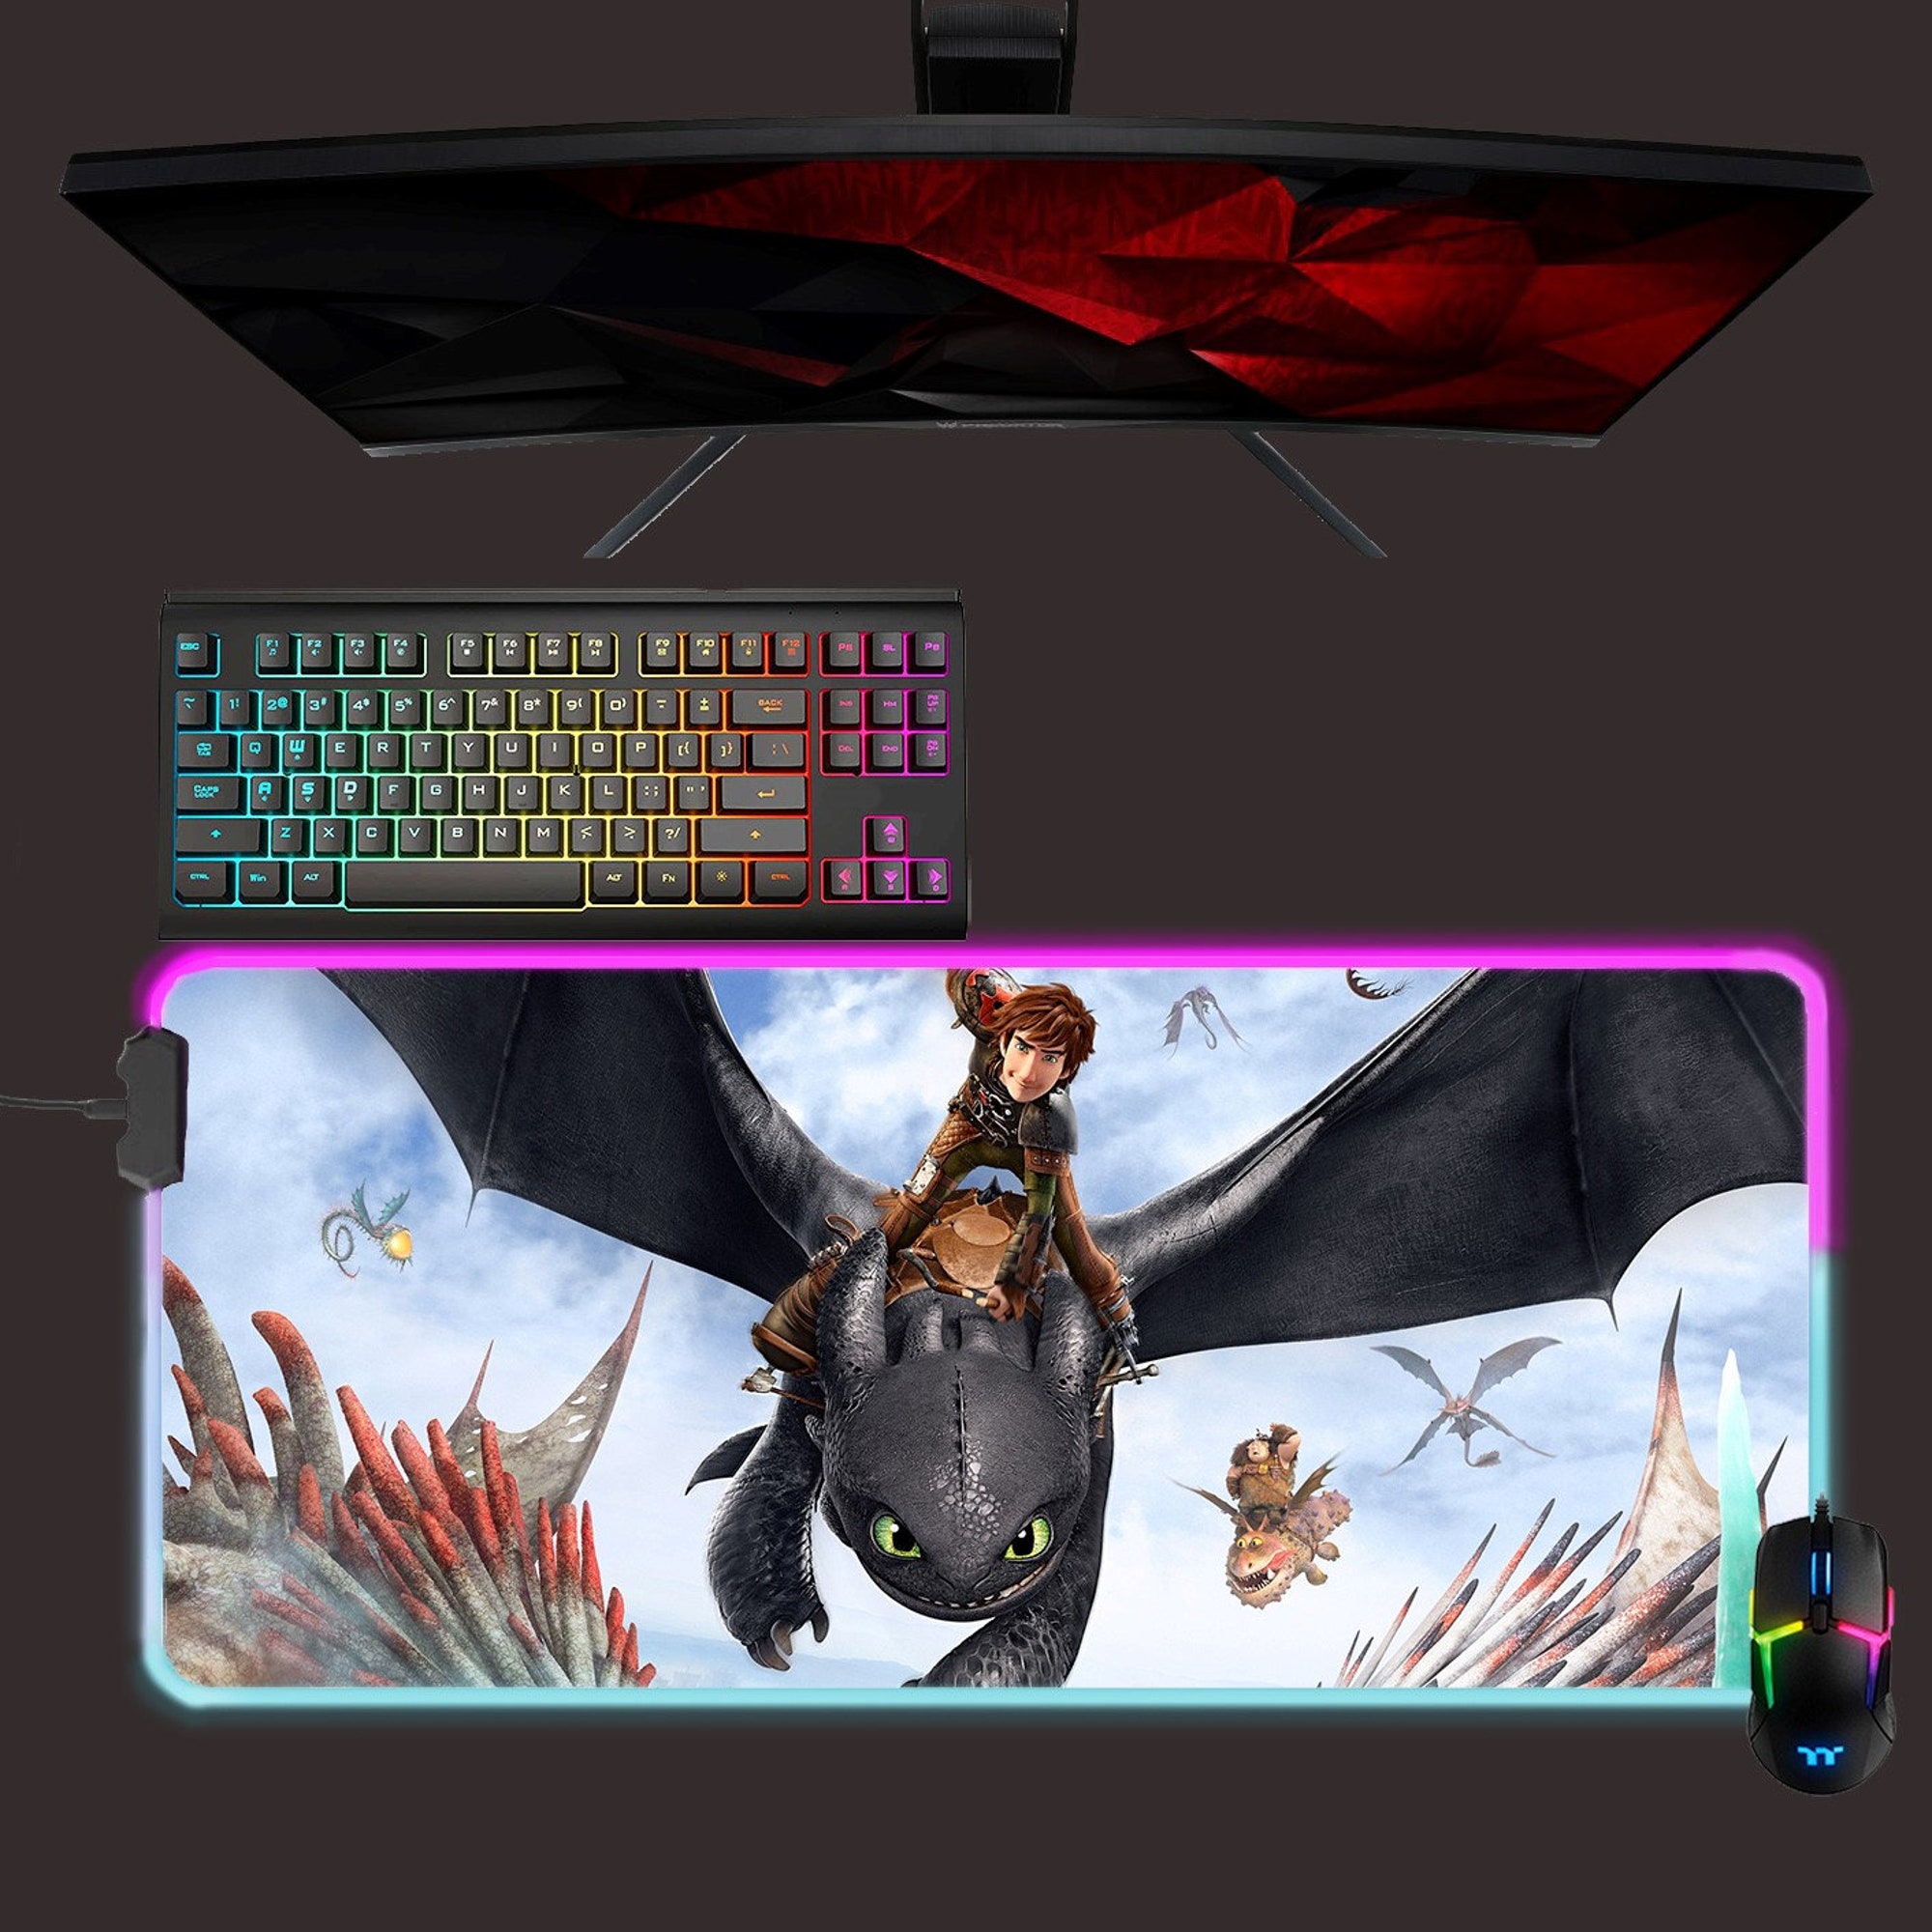 How To Train Your Dragon led mouse mat, Toothless rgb mouse pad, gaming mouse pad